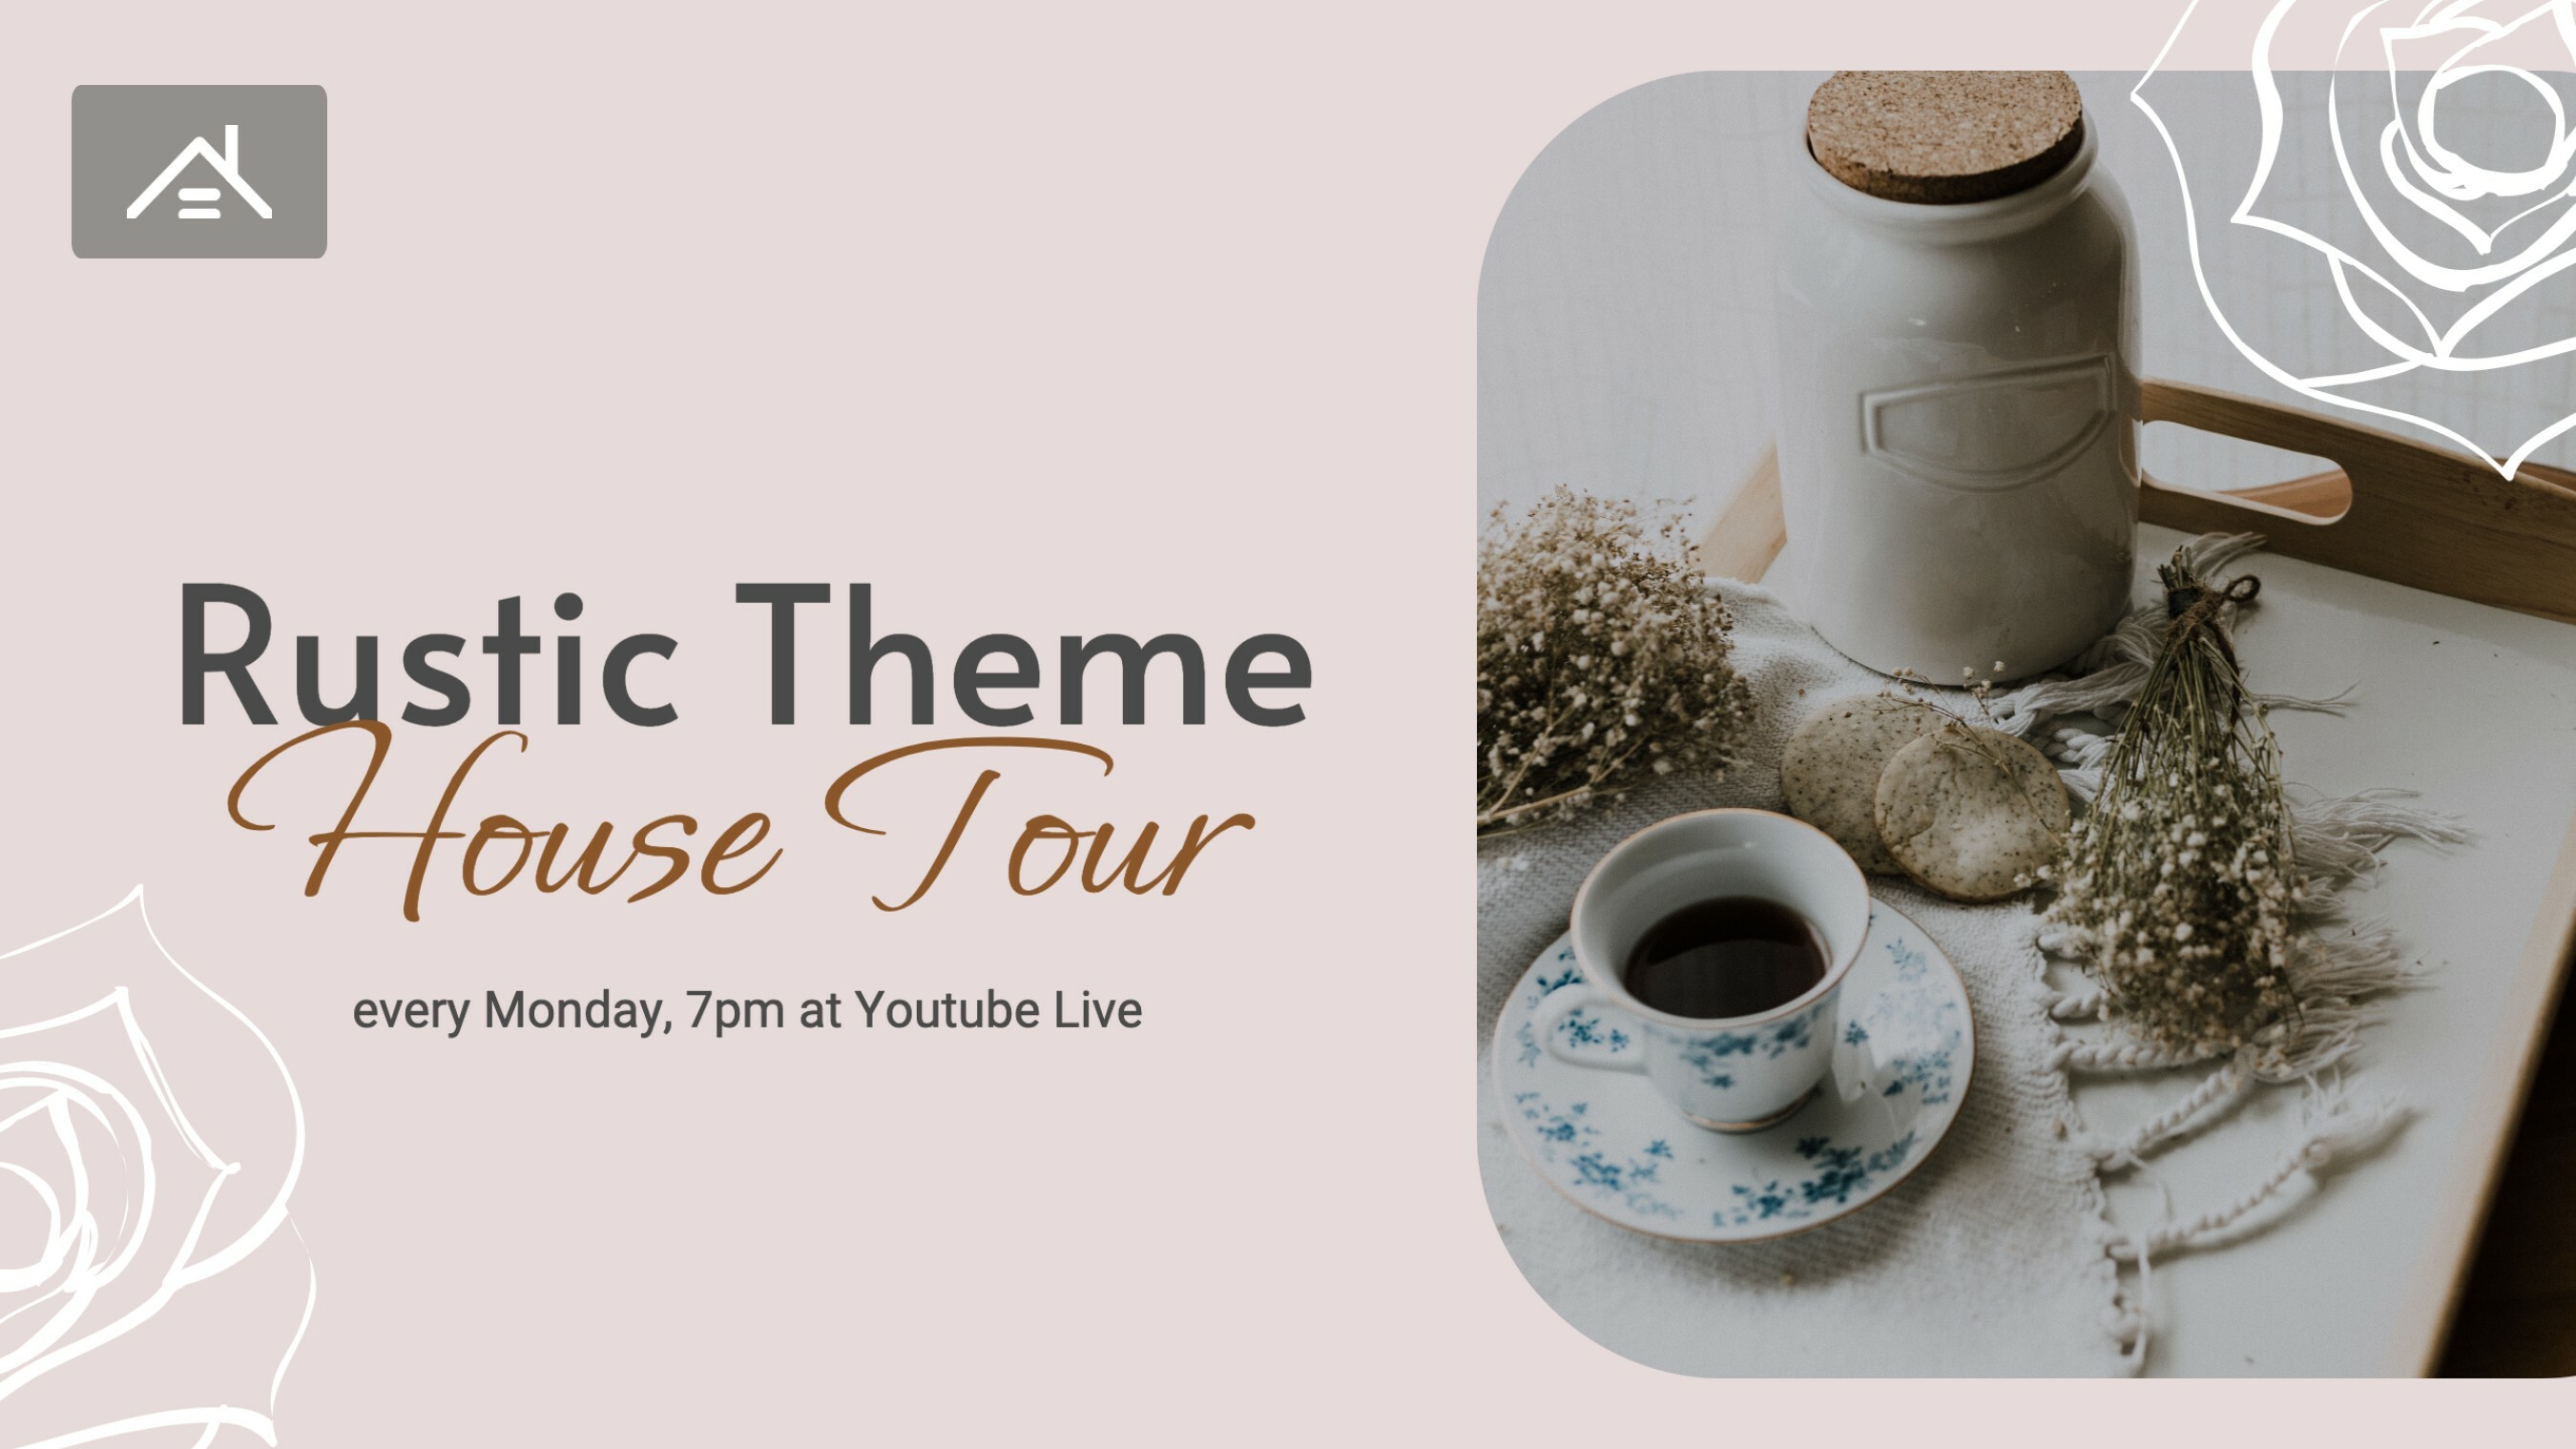 Rustic Theme House Tour Banner template